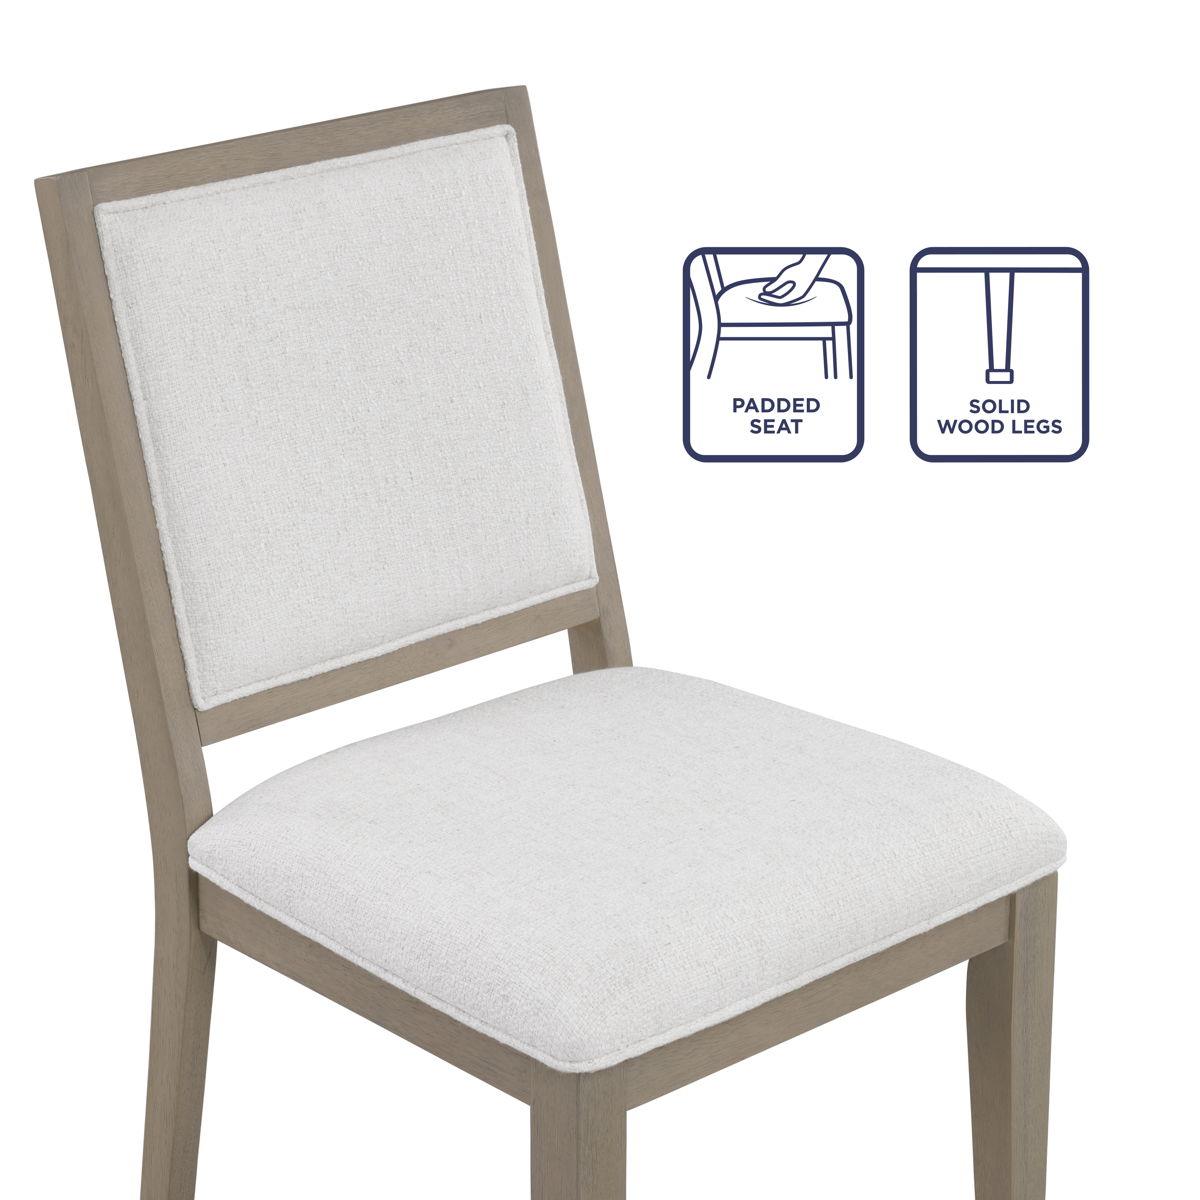 Steve Silver Furniture - Lily - Side Chair (Set of 2) - Gray - 5th Avenue Furniture